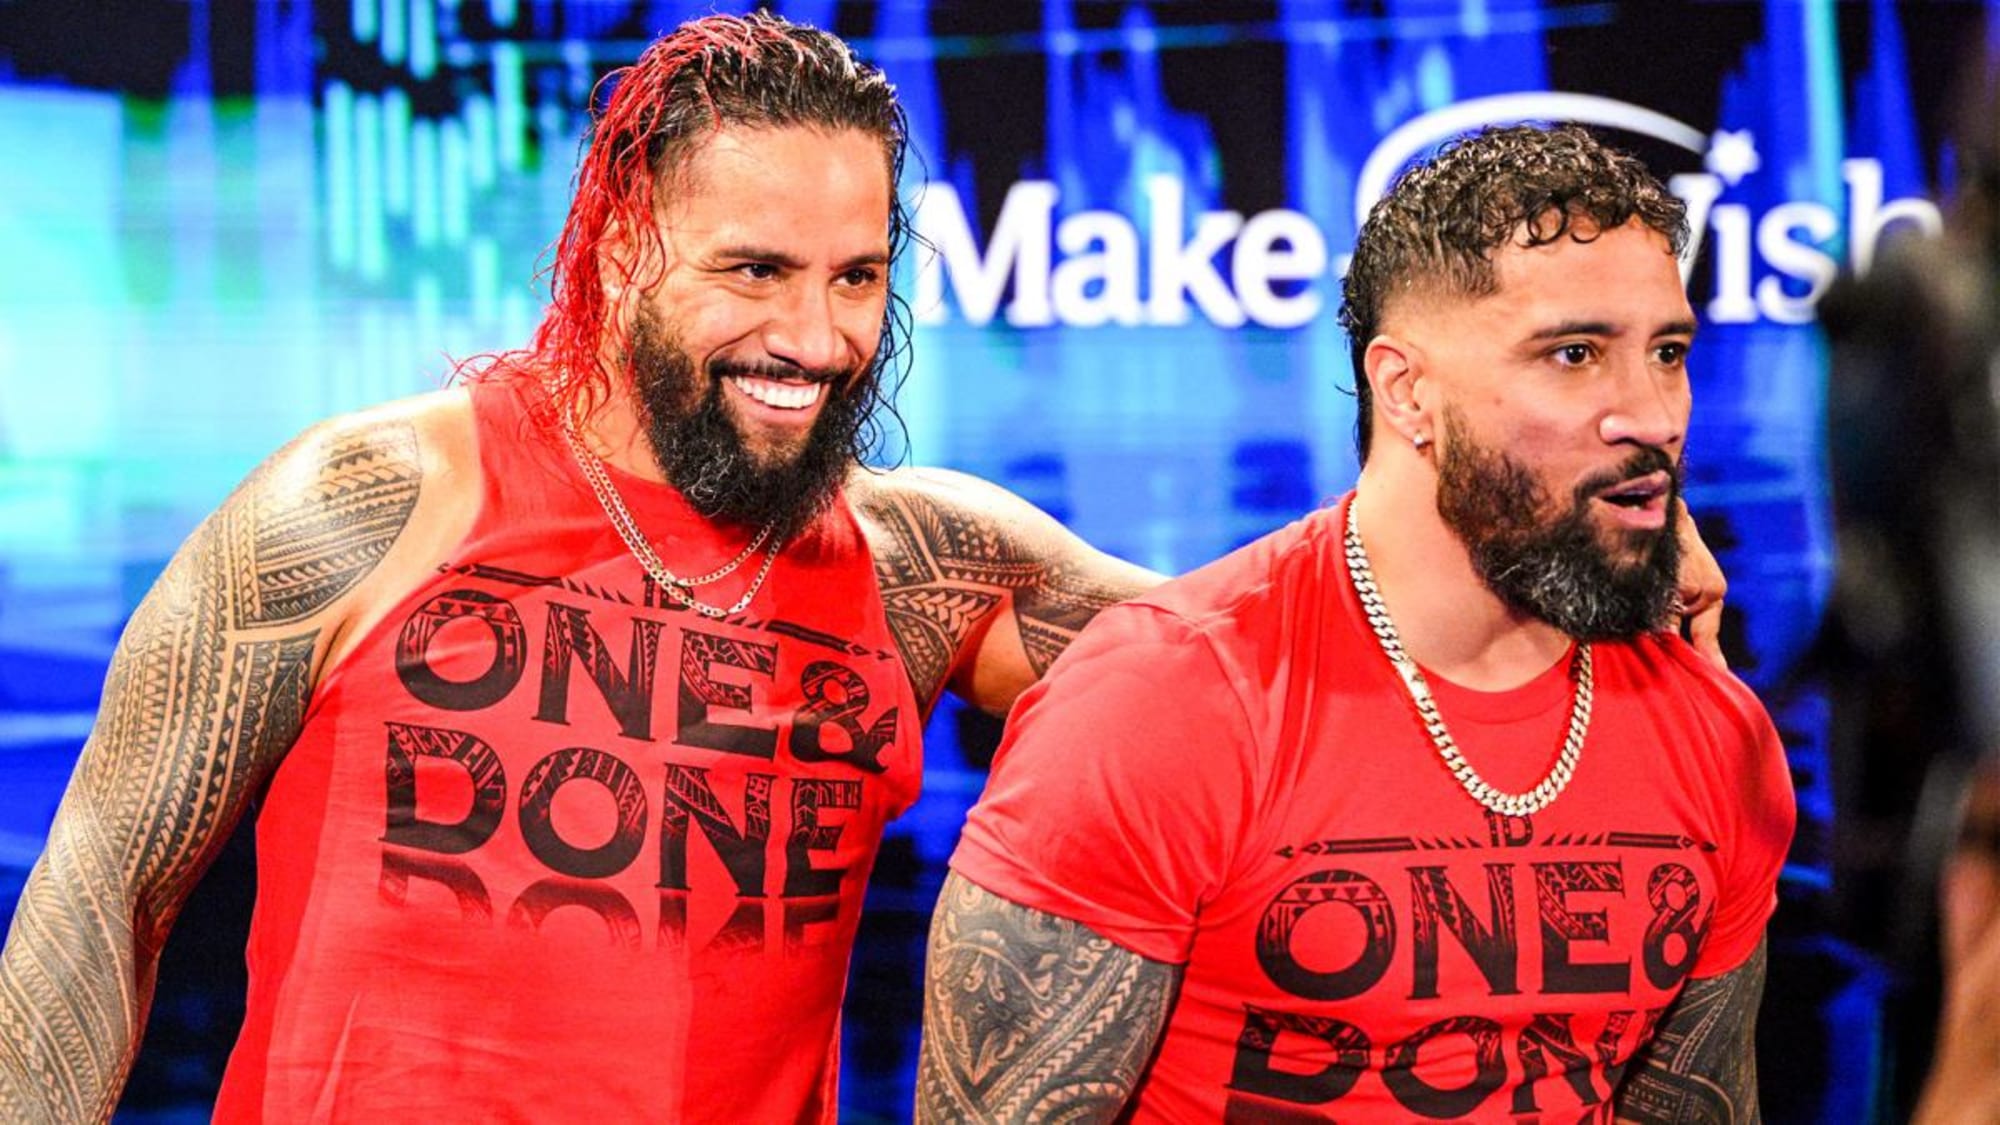 3 potential challengers for unified tag team champs The Usos